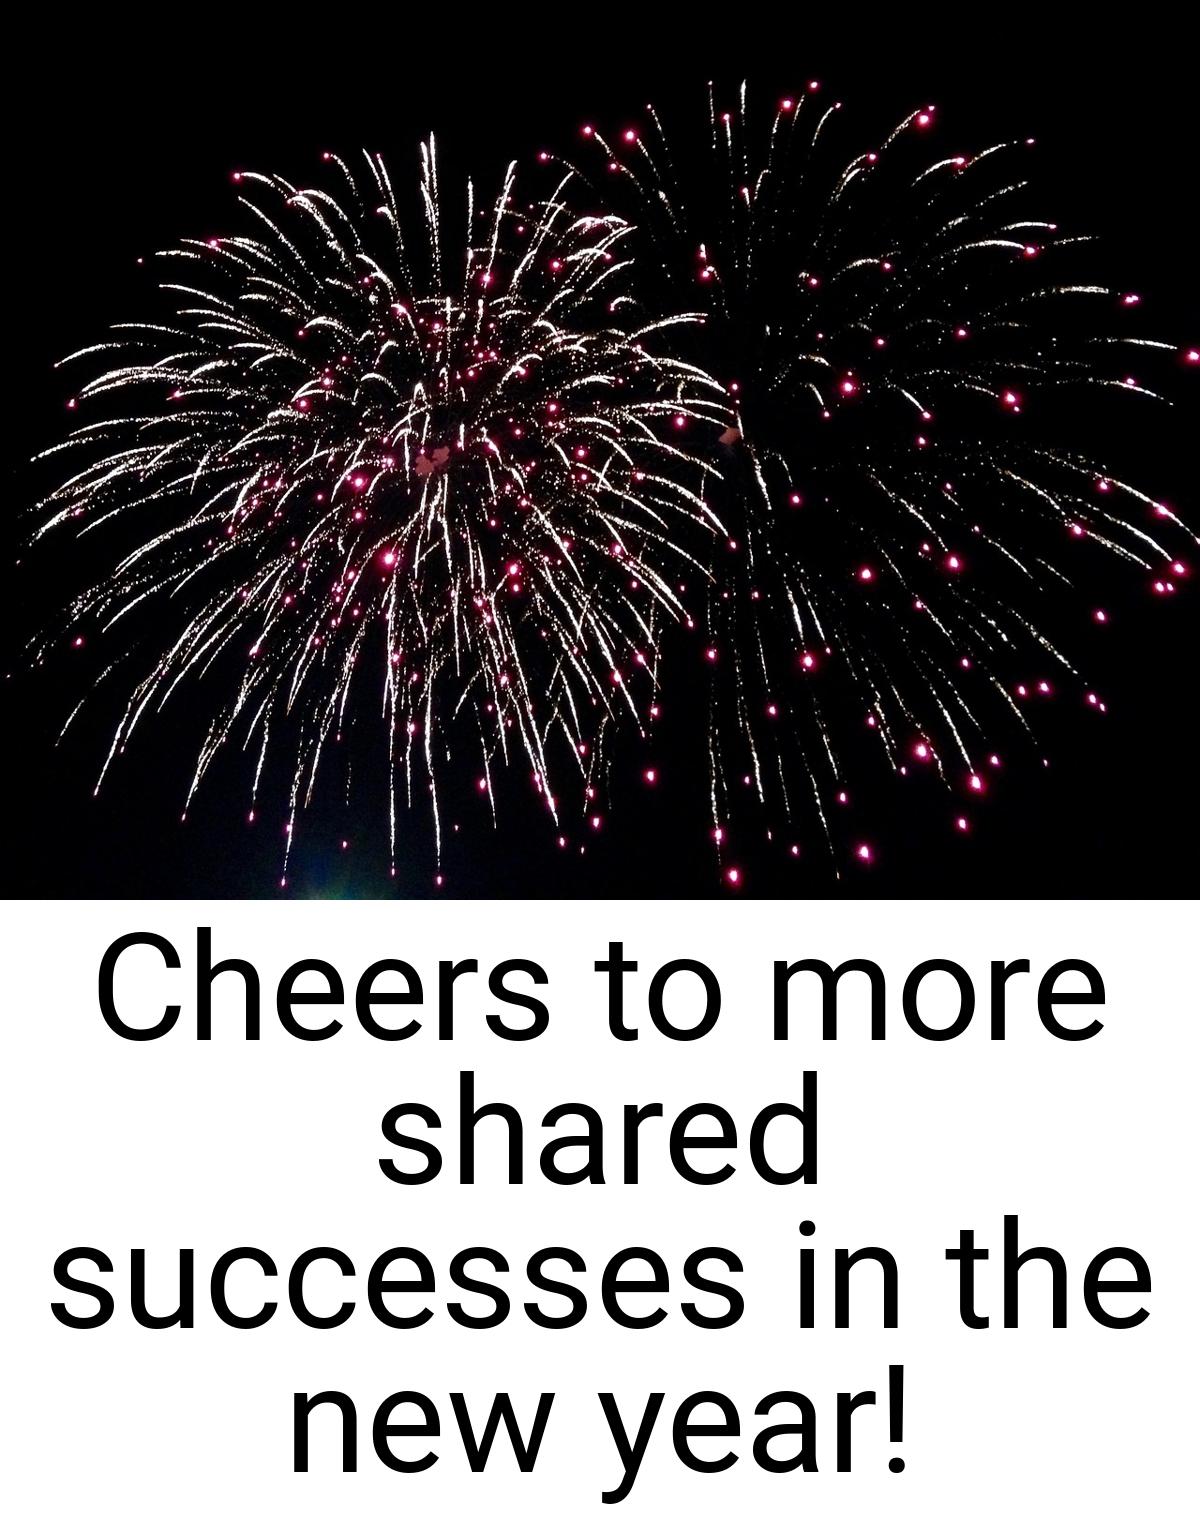 Cheers to more shared successes in the new year